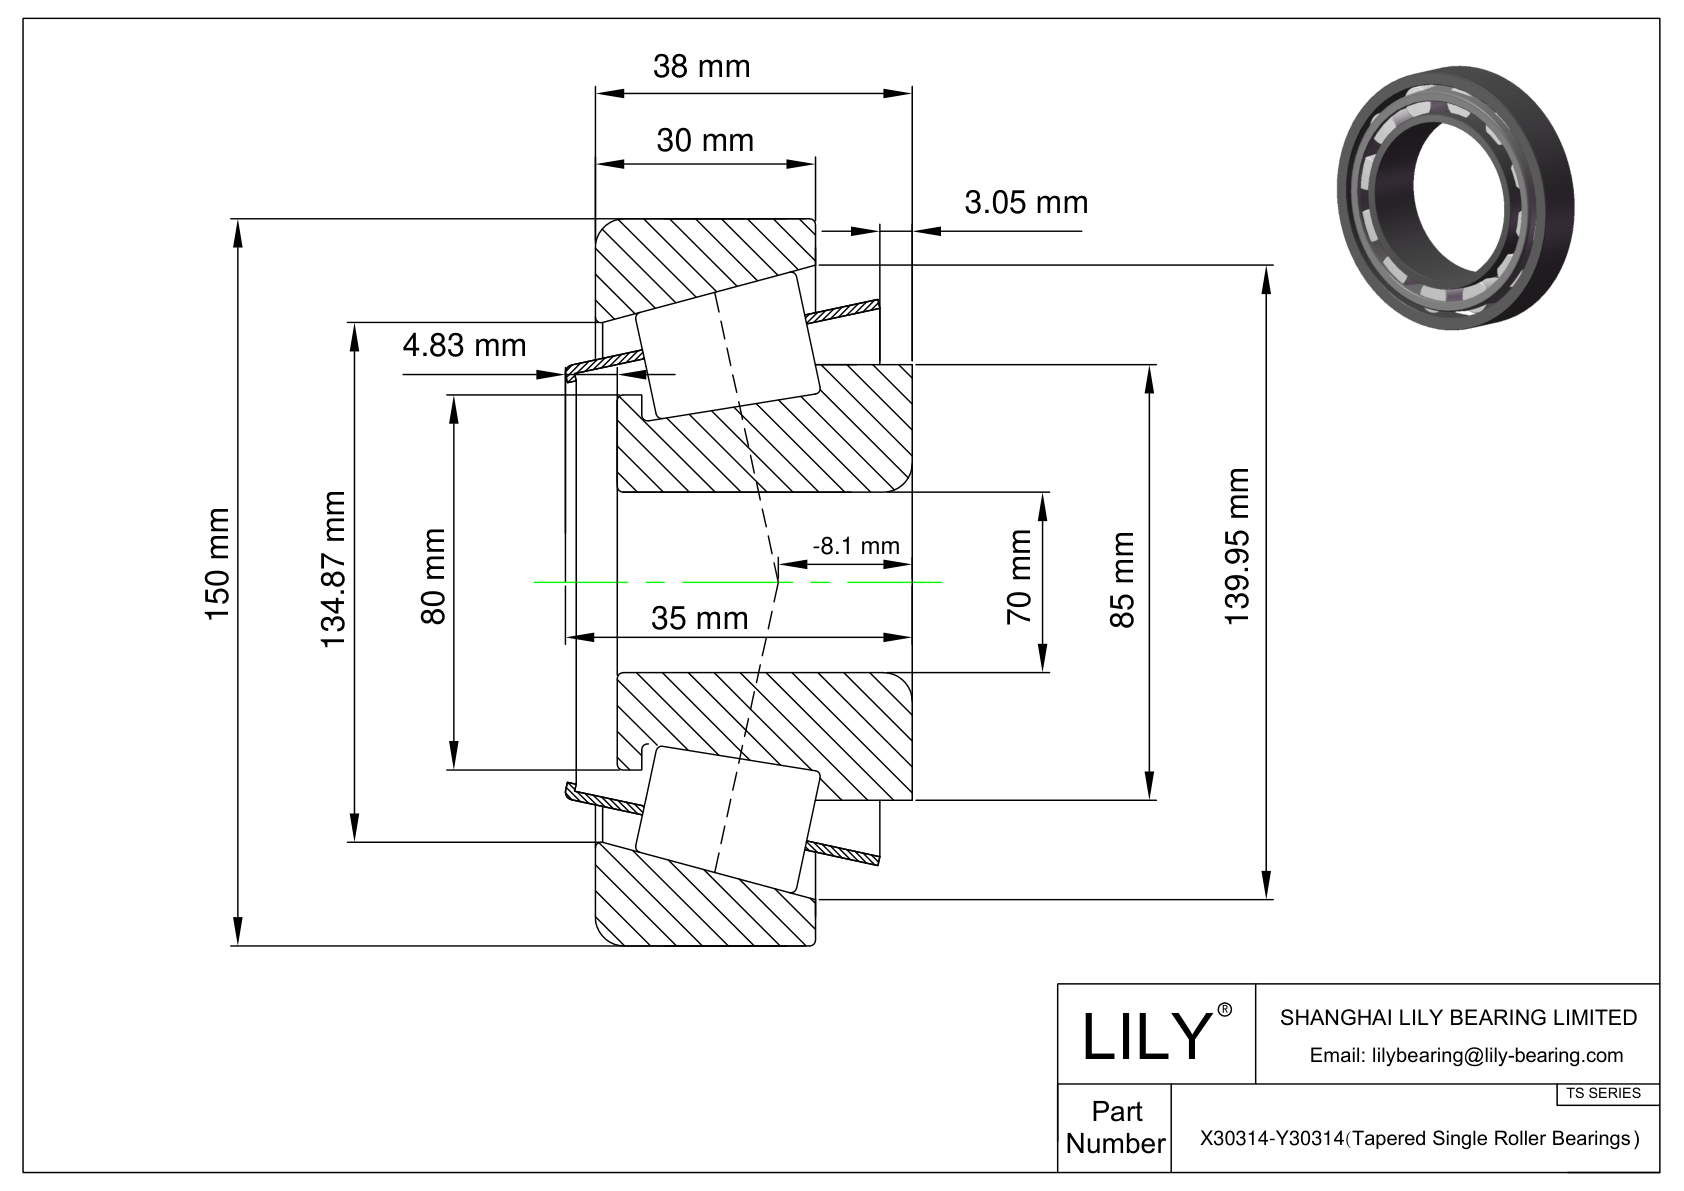 X30314-Y30314 TS (Tapered Single Roller Bearings) (Metric) cad drawing